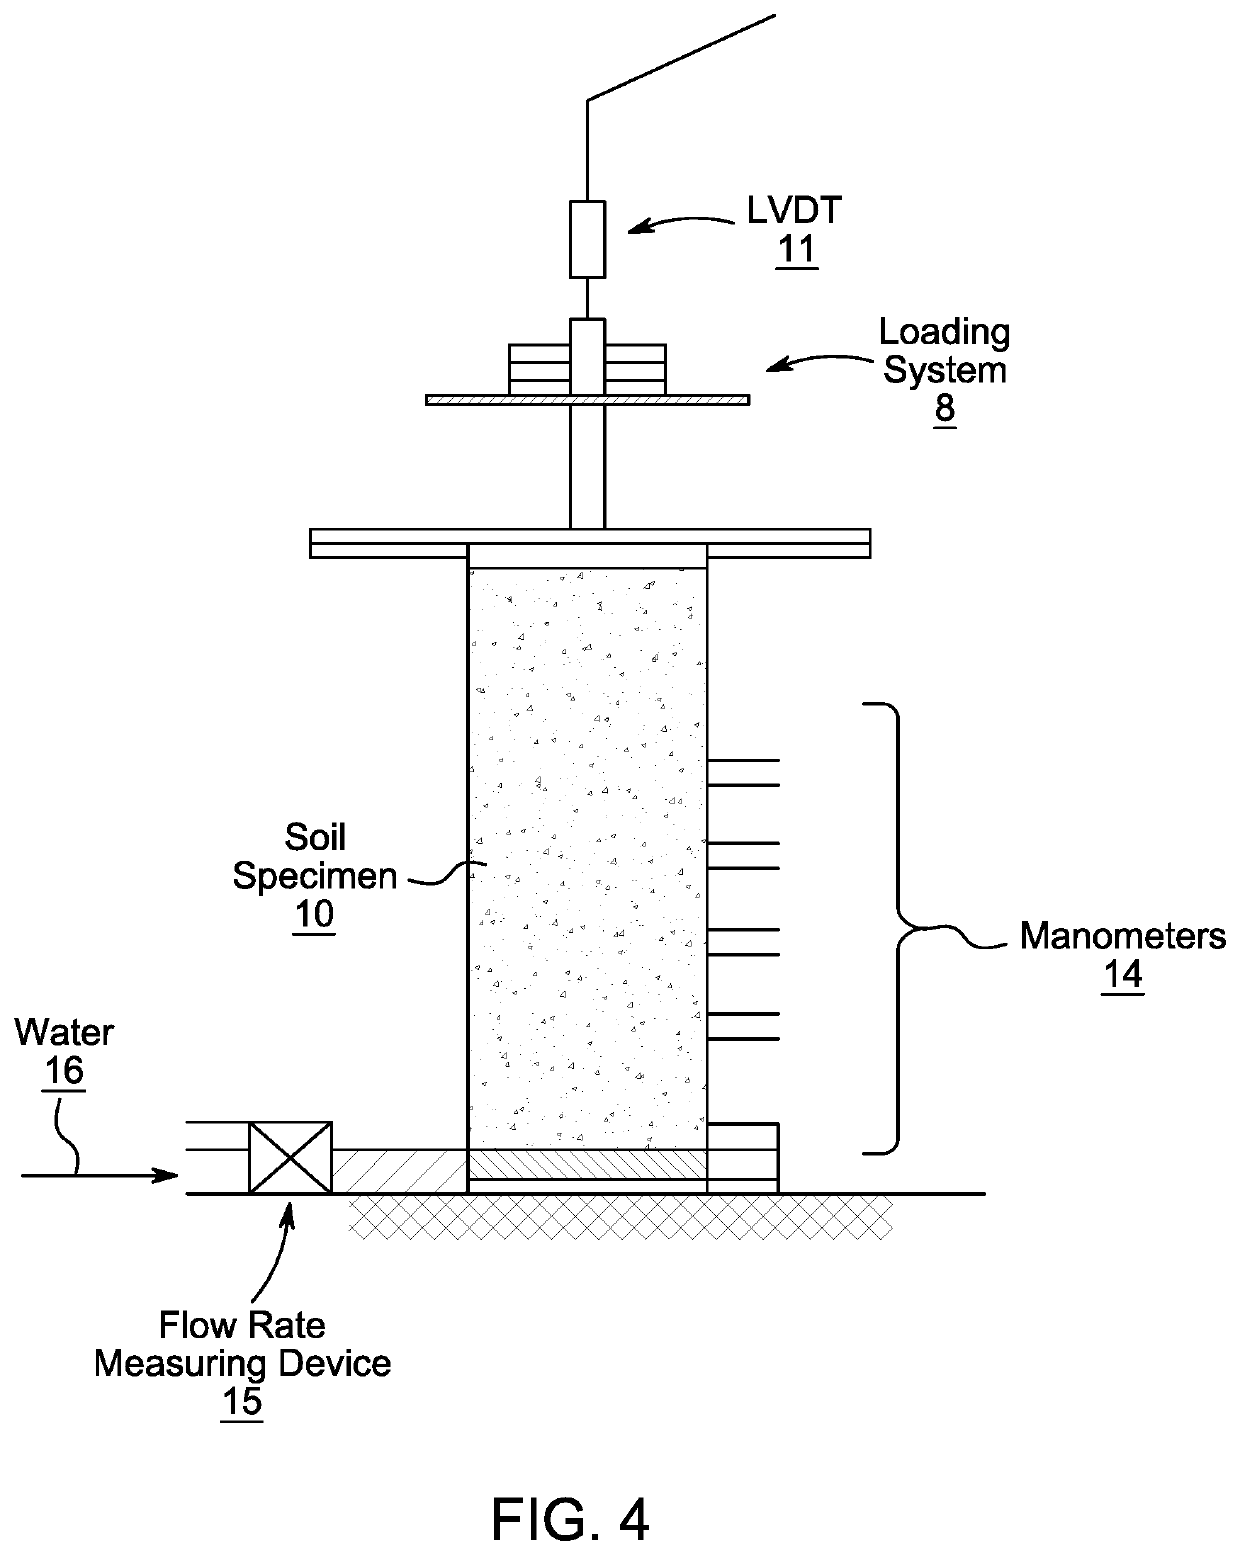 Hydraulic confinement and measuring system for determining hydraulic conductivity of porous carbonates and sandstones